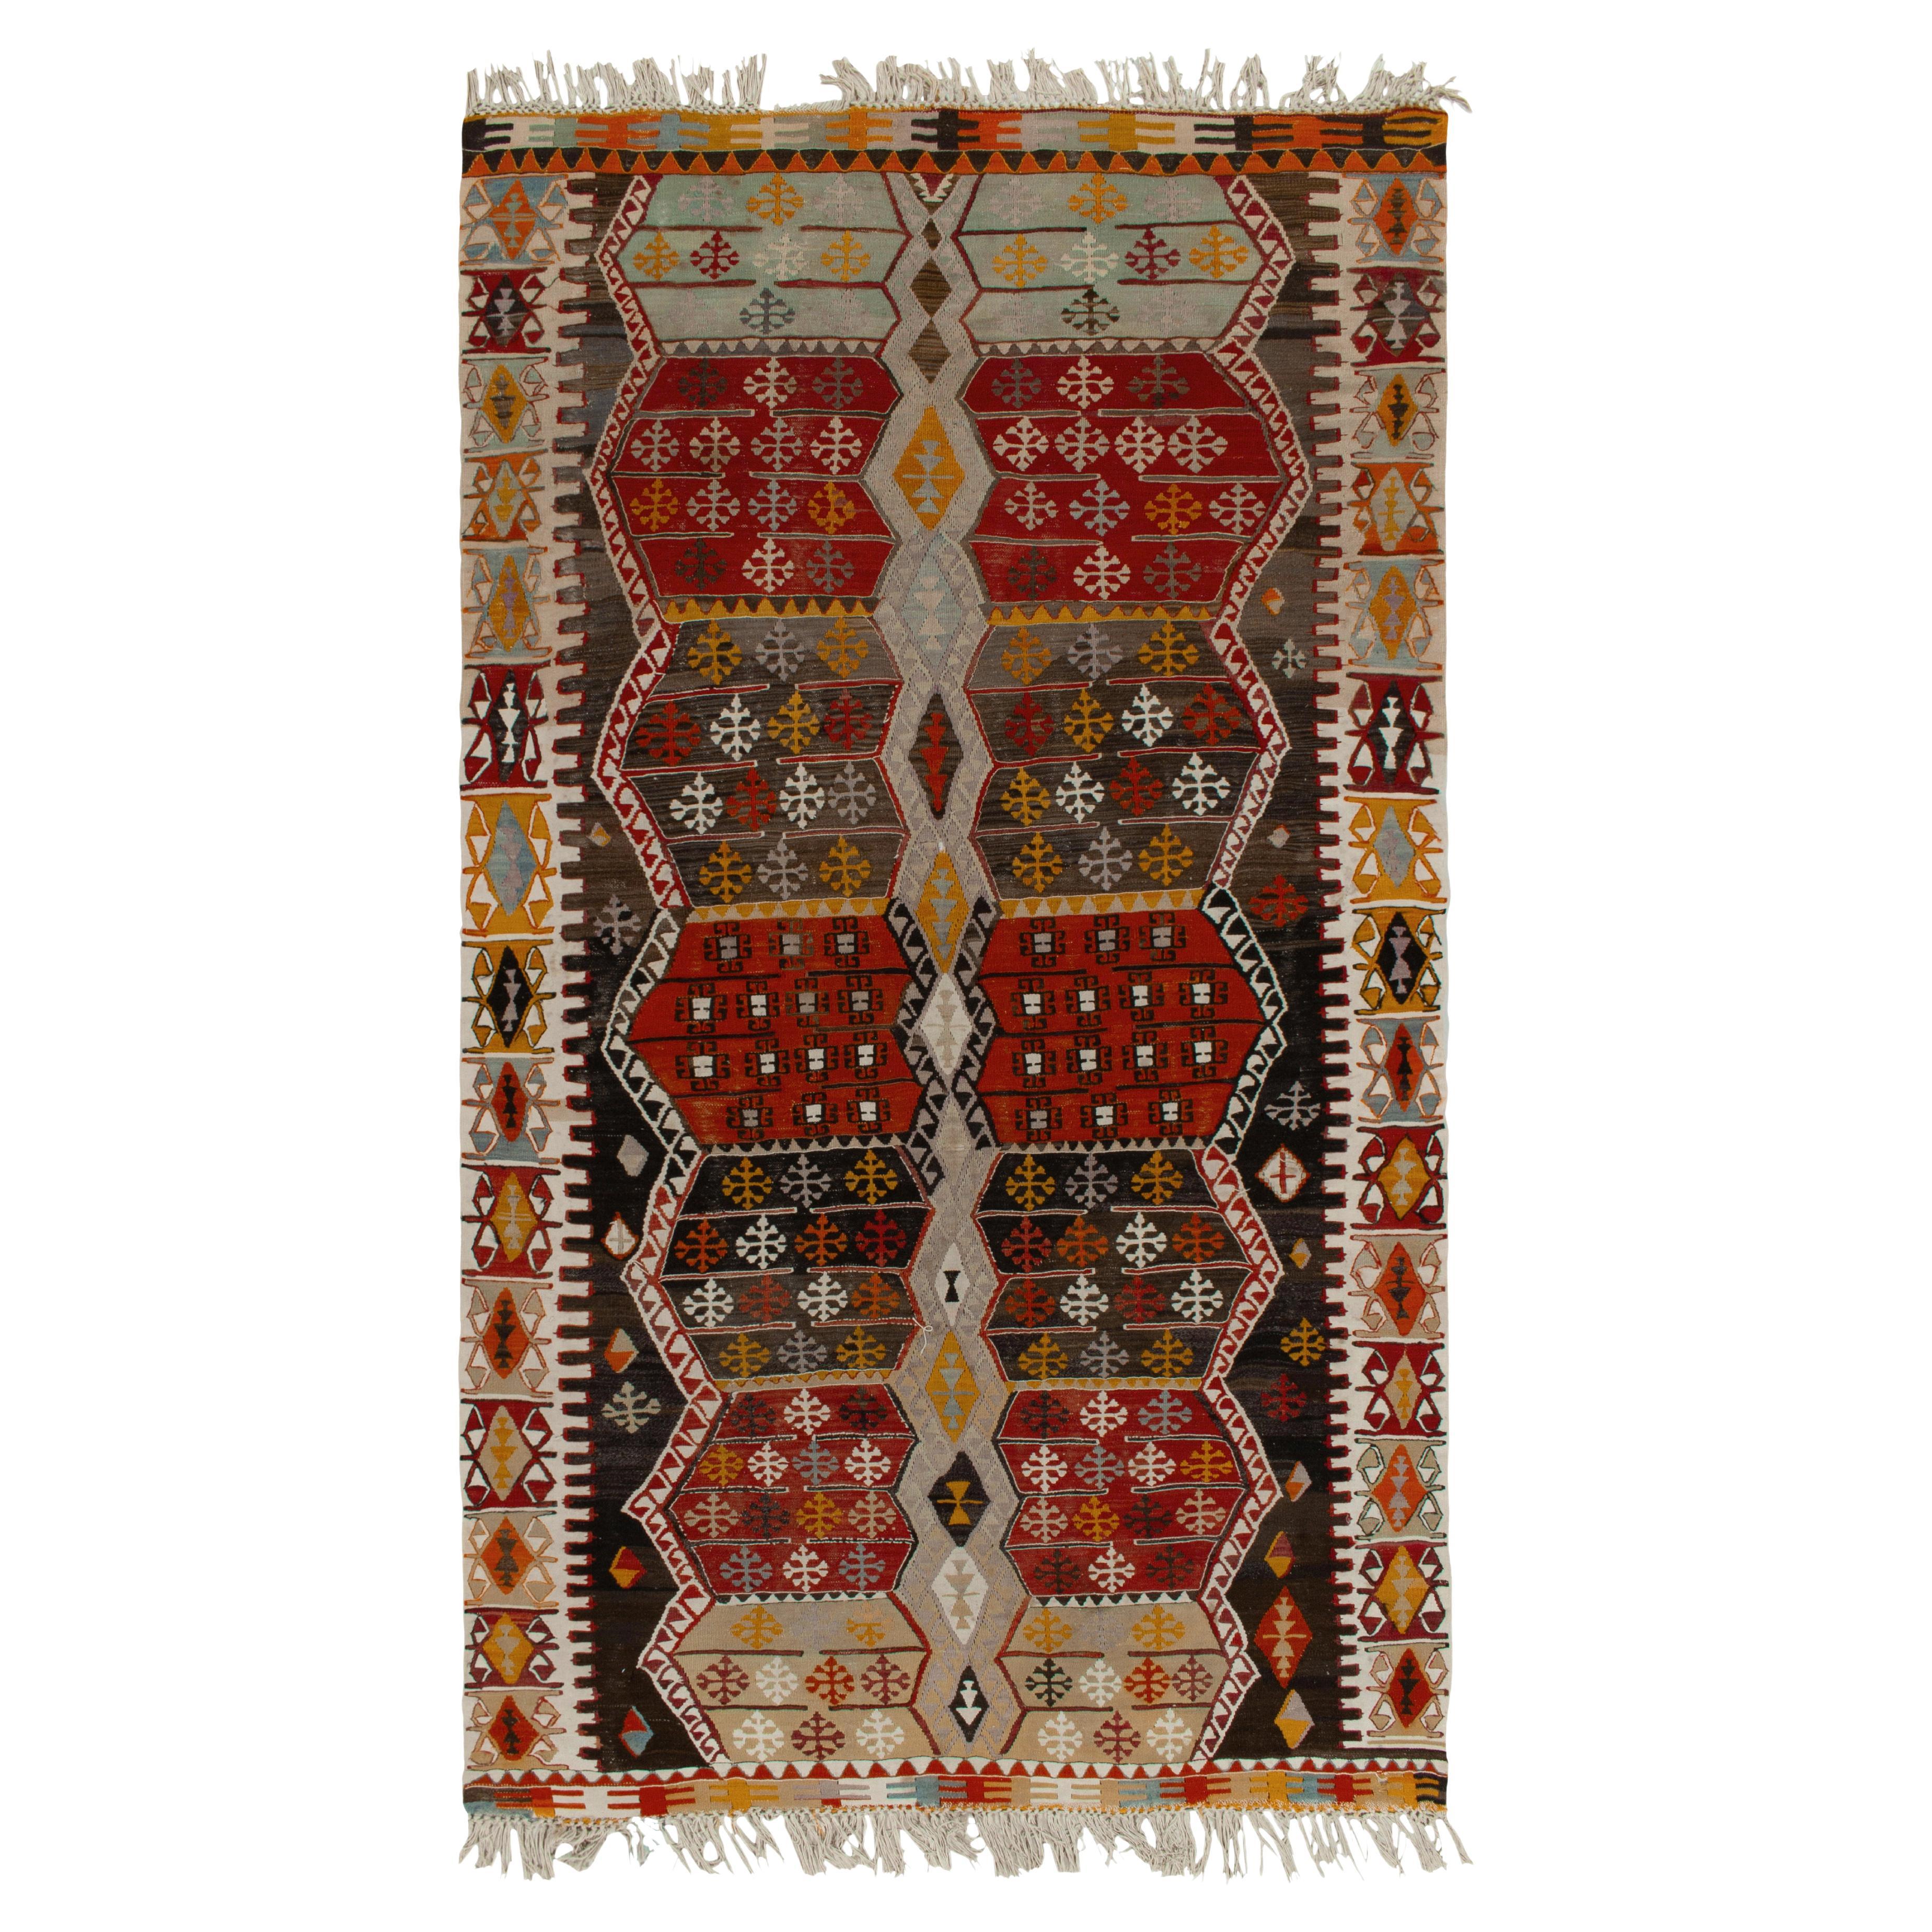 1930s Antique Turkish Kilim in Red and Brown with Gold and Grey by Rug & Kilim For Sale